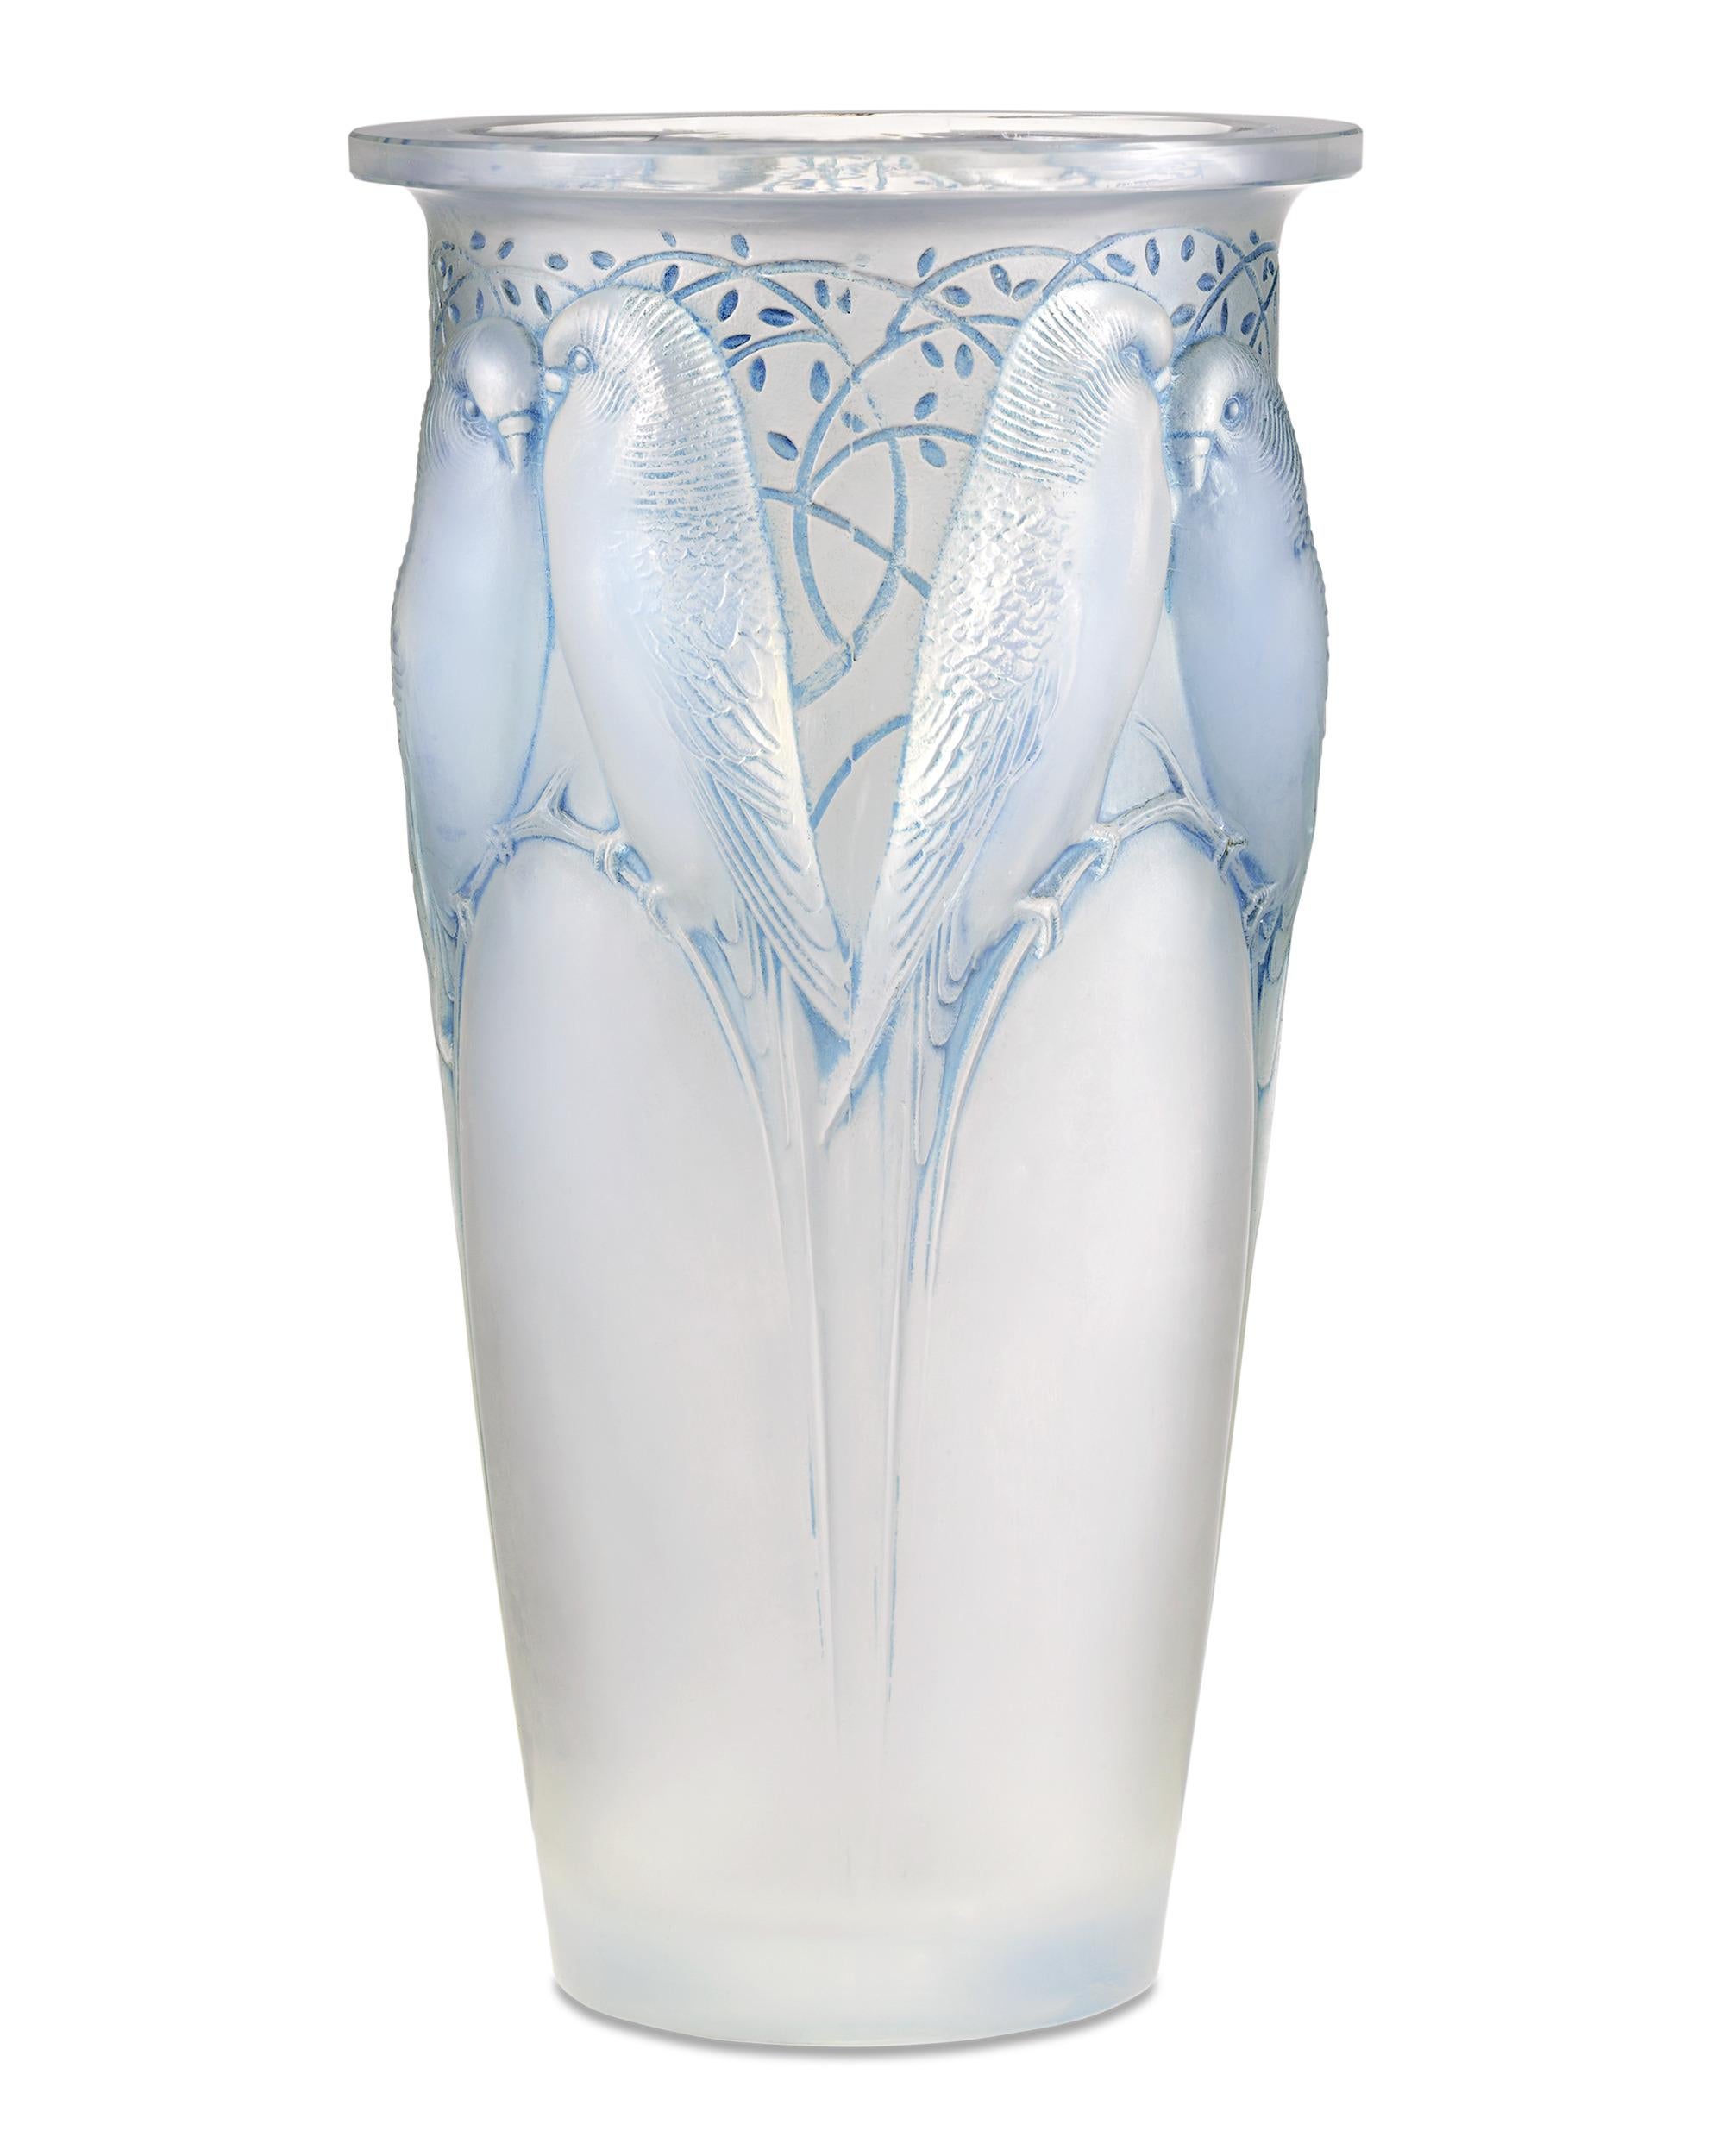 Crafted by the celebrated French glassmaker René Lalique, this enchanting Ceylan vase is molded from opalescent glass with a blue stained wheel. The design, conceived by Lalique on May 16, 1924, is also known as Huit perruches (